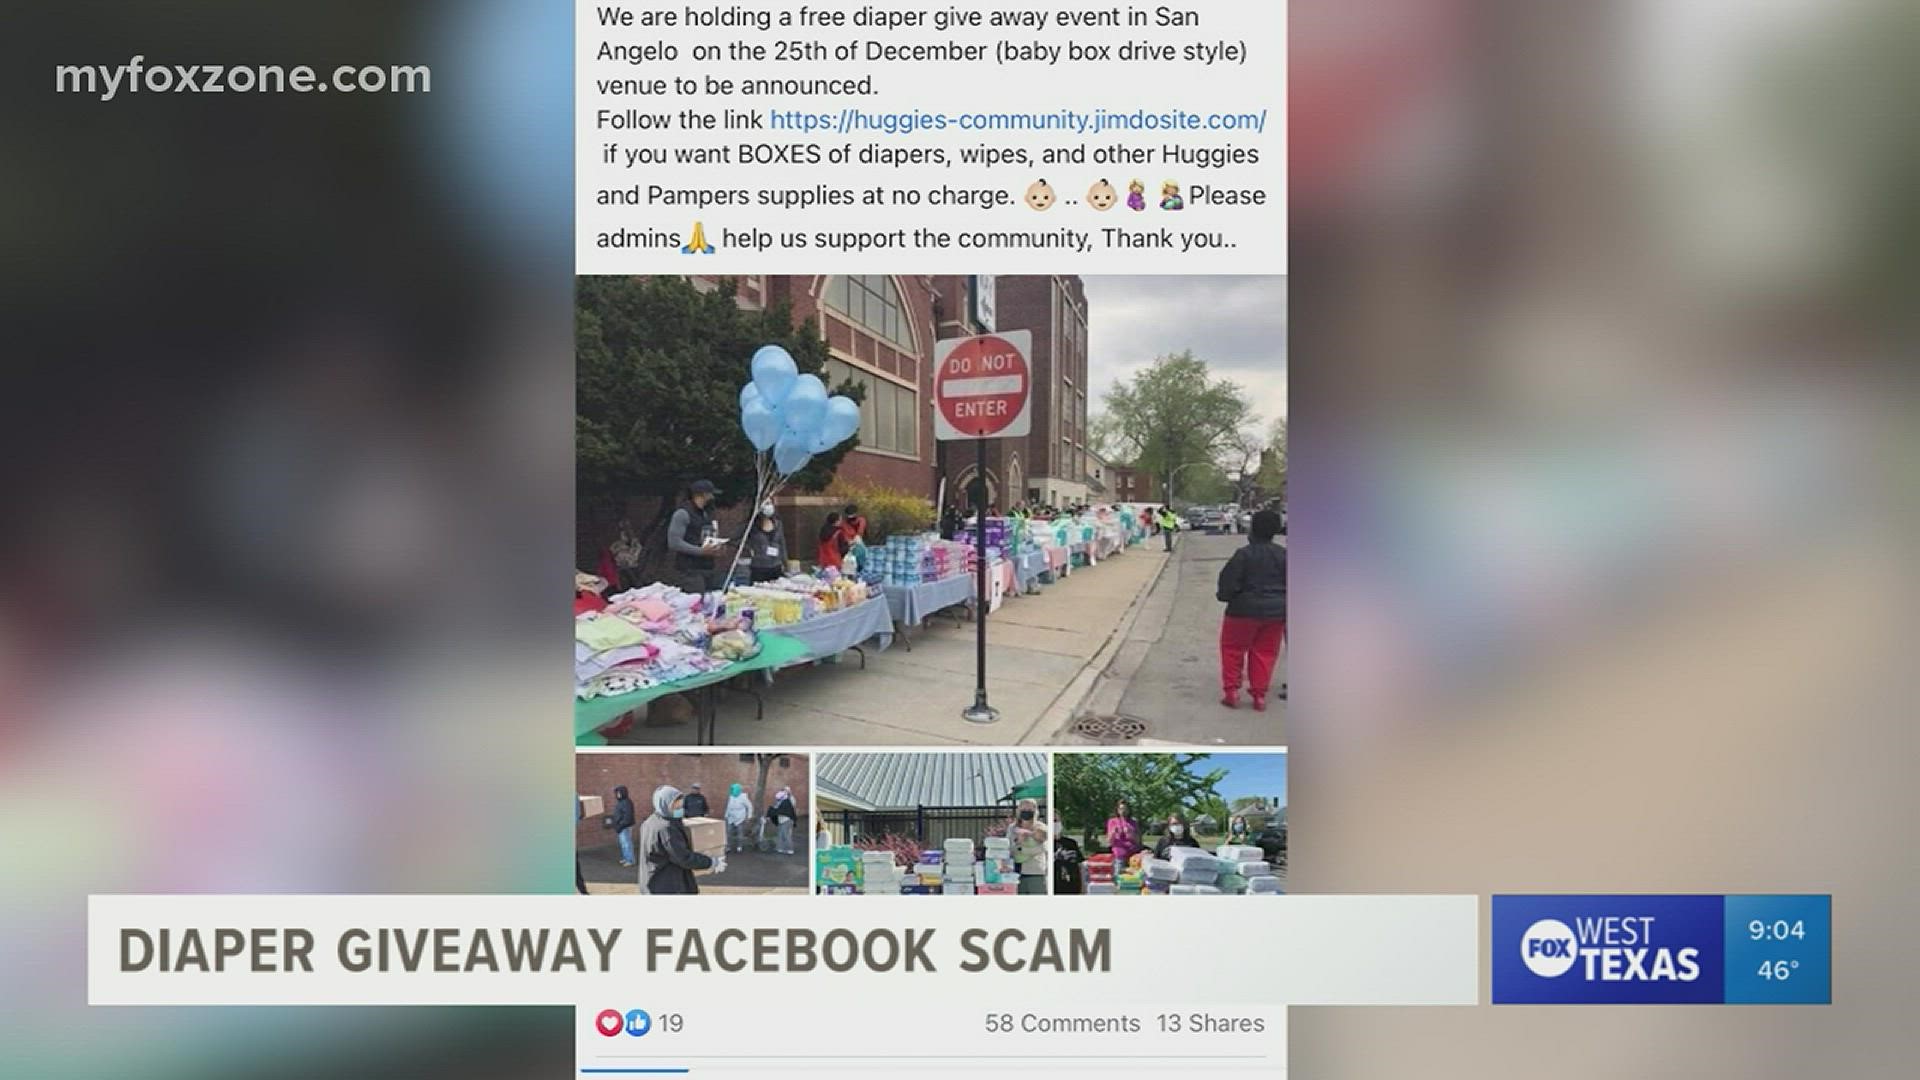 Law enforcement is alerting the community about a Facebook scam claiming to give away free diapers and baby wipes.